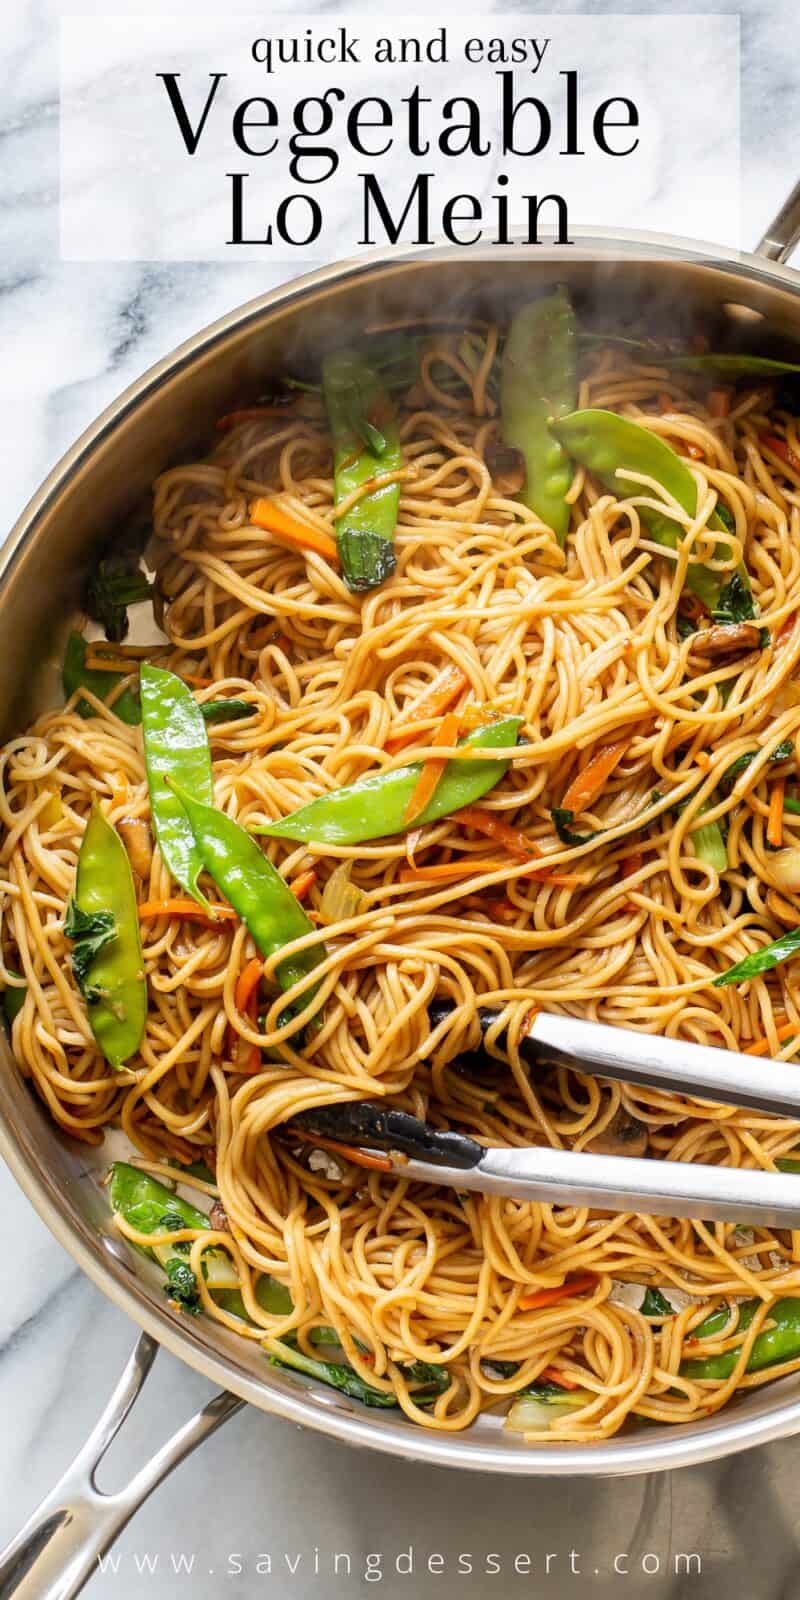 An overhead view of a skillet filled with Vegetable Lo Mein